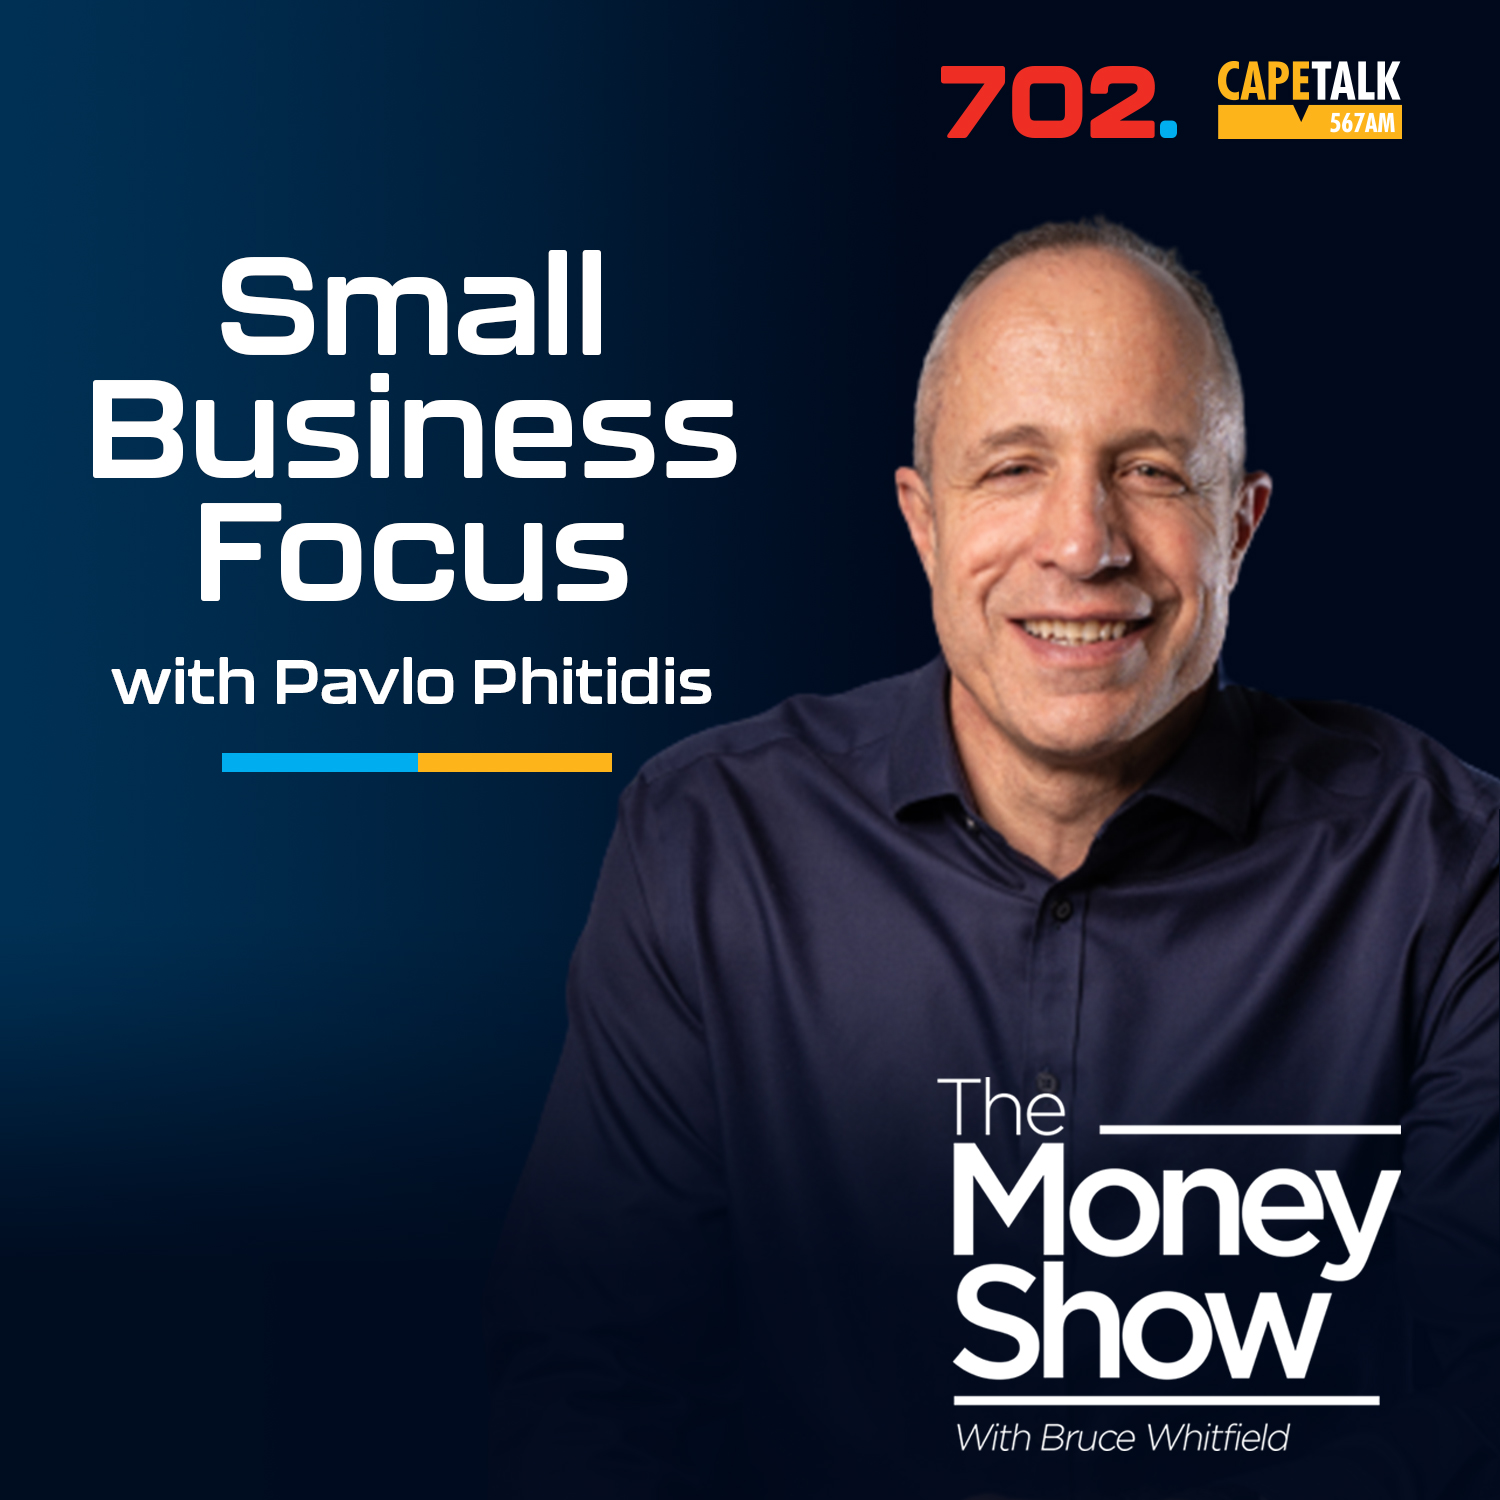 Small Business Focus - How do you build a business that survives